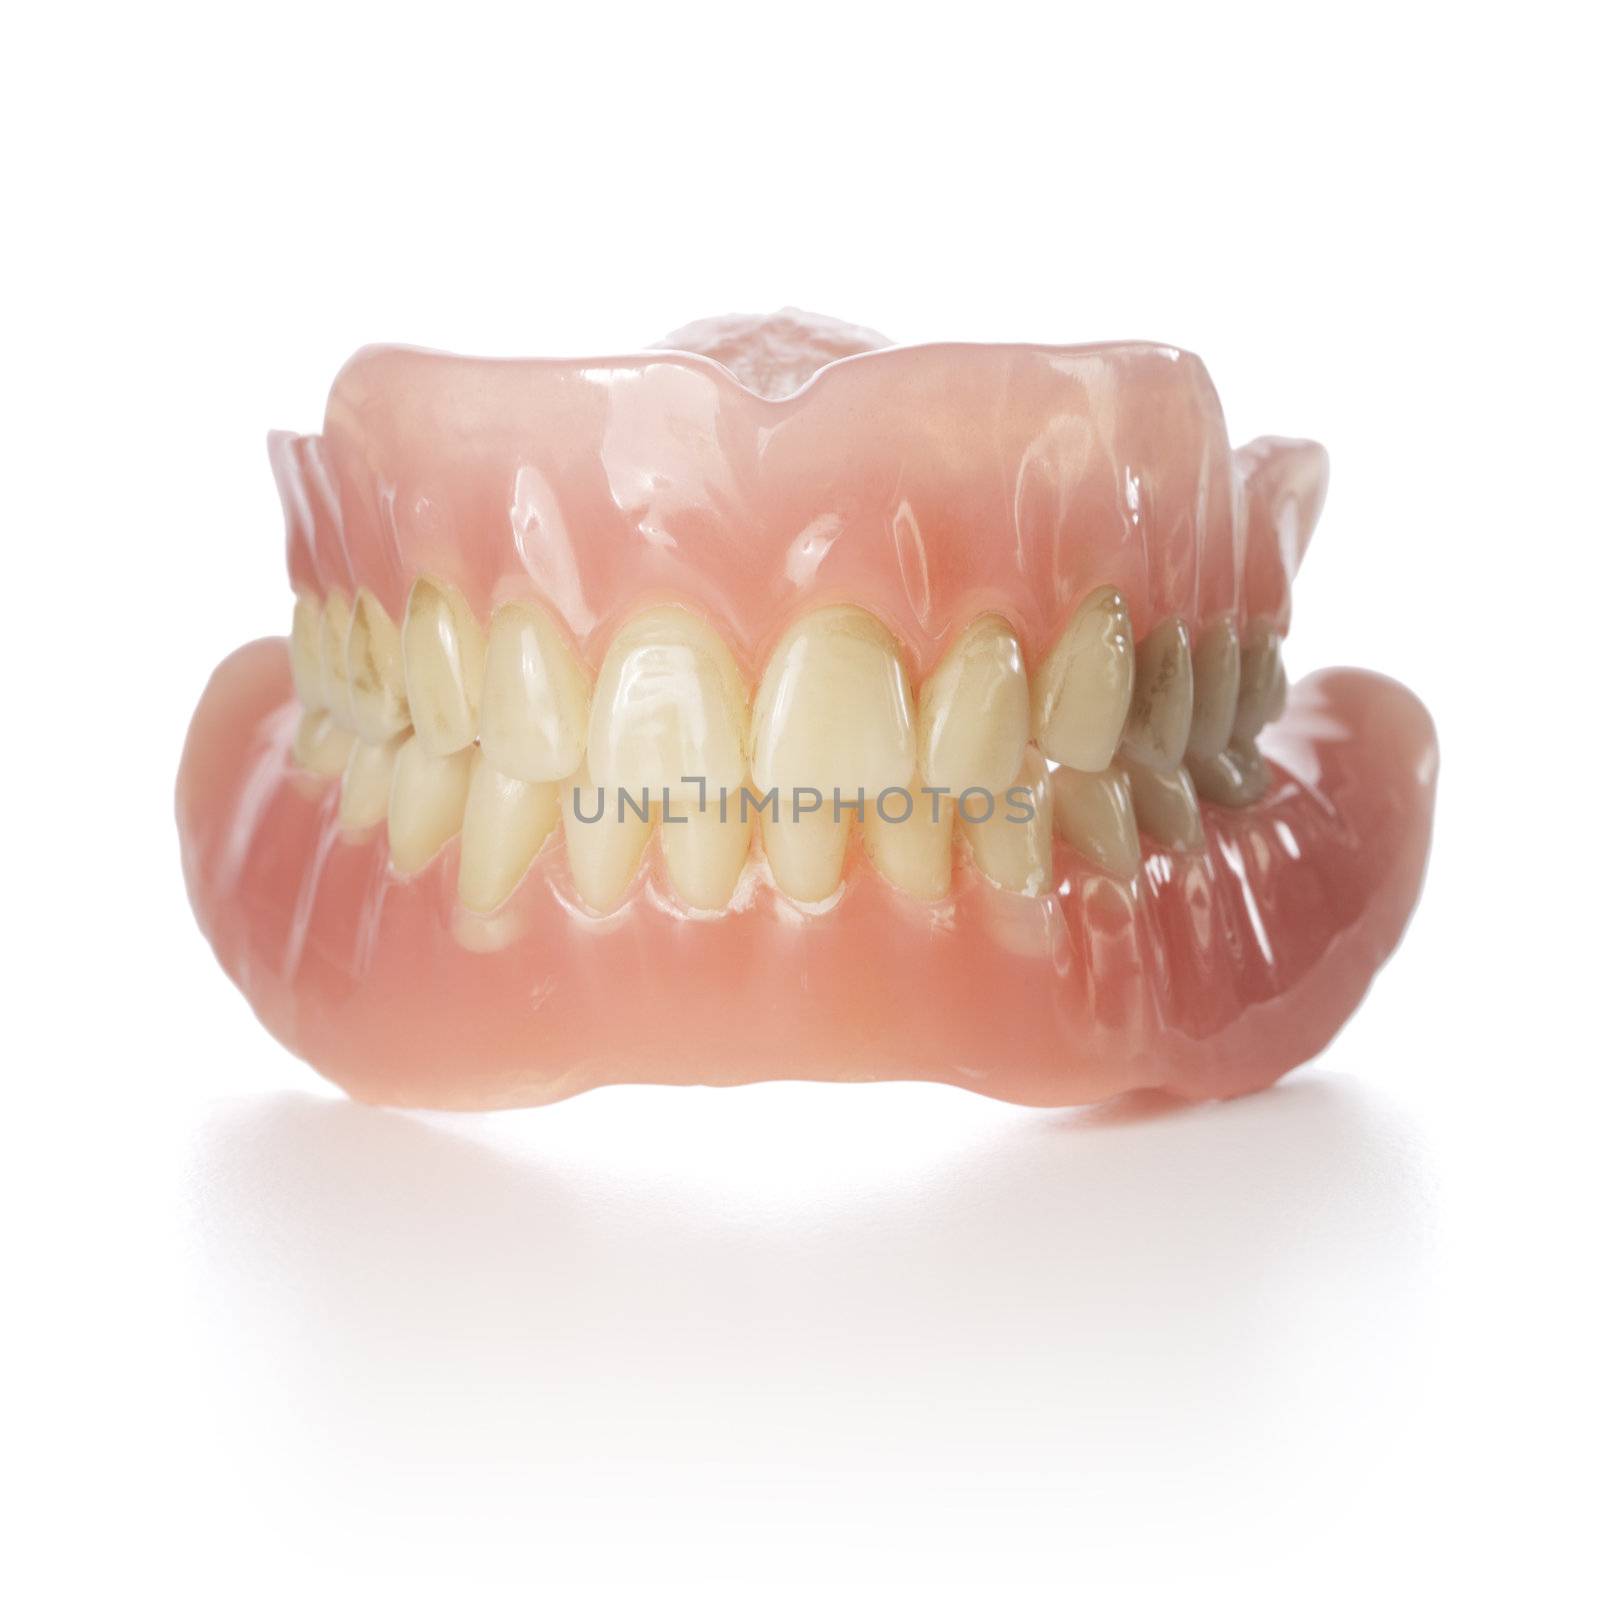 Old dentures with yellowed teeth isolated on white with reflection.